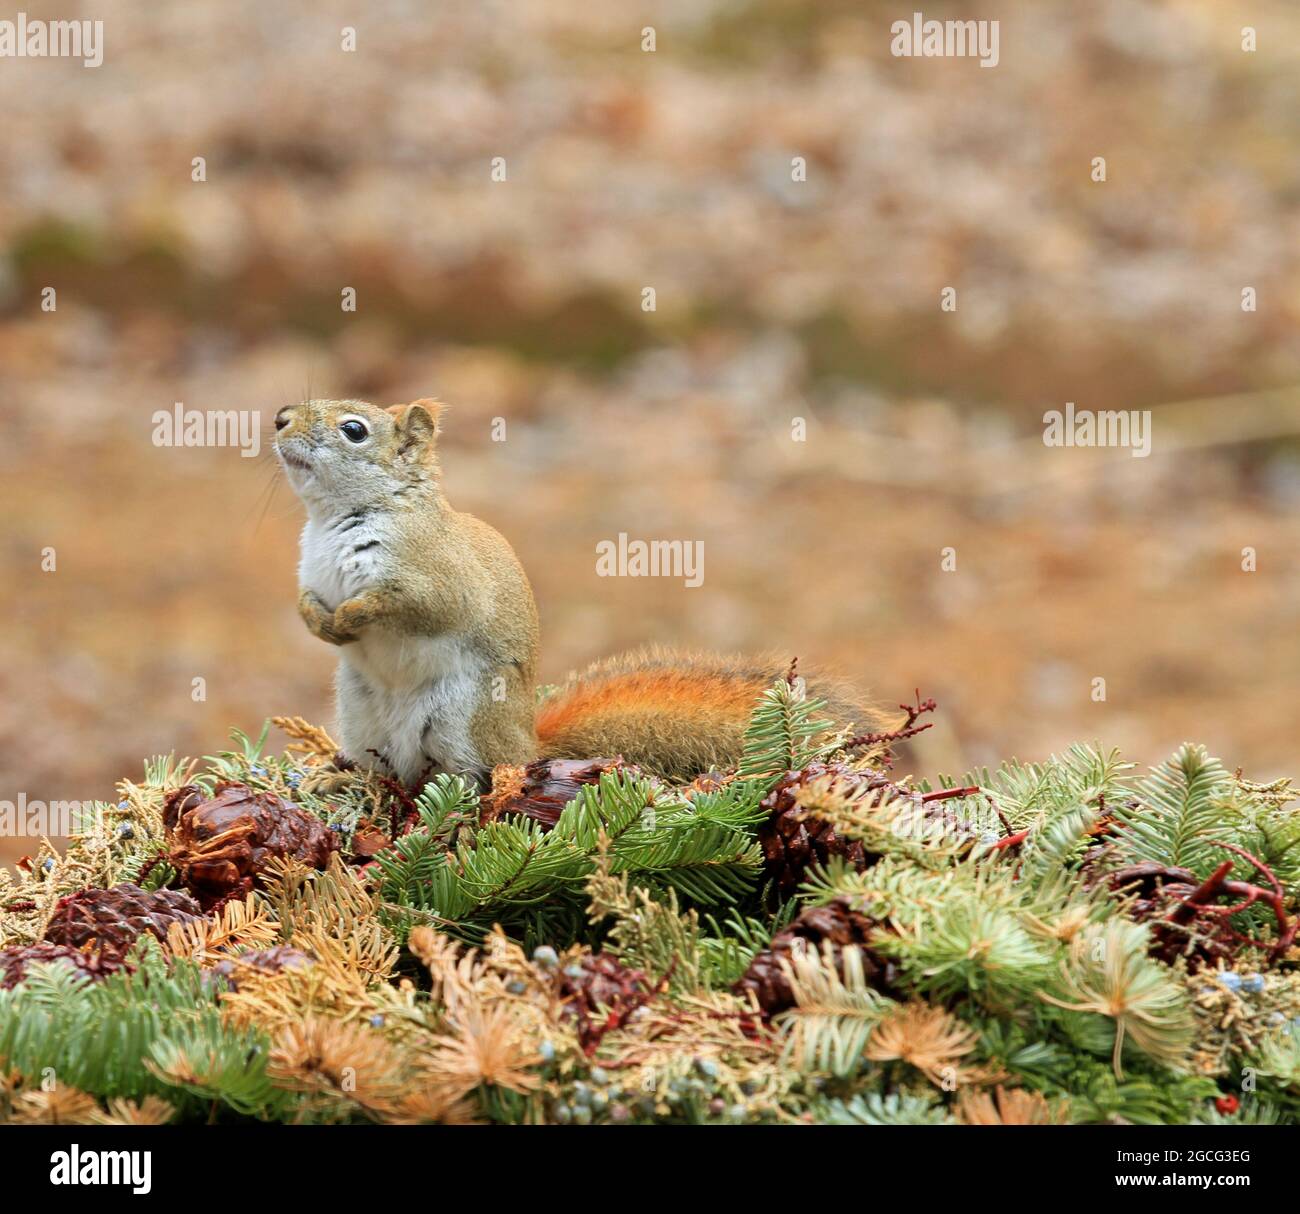 An alert North American red squirrel (Tamiasciurus hudsonicus) sitting up in a New England backyard on a Spring day Stock Photo